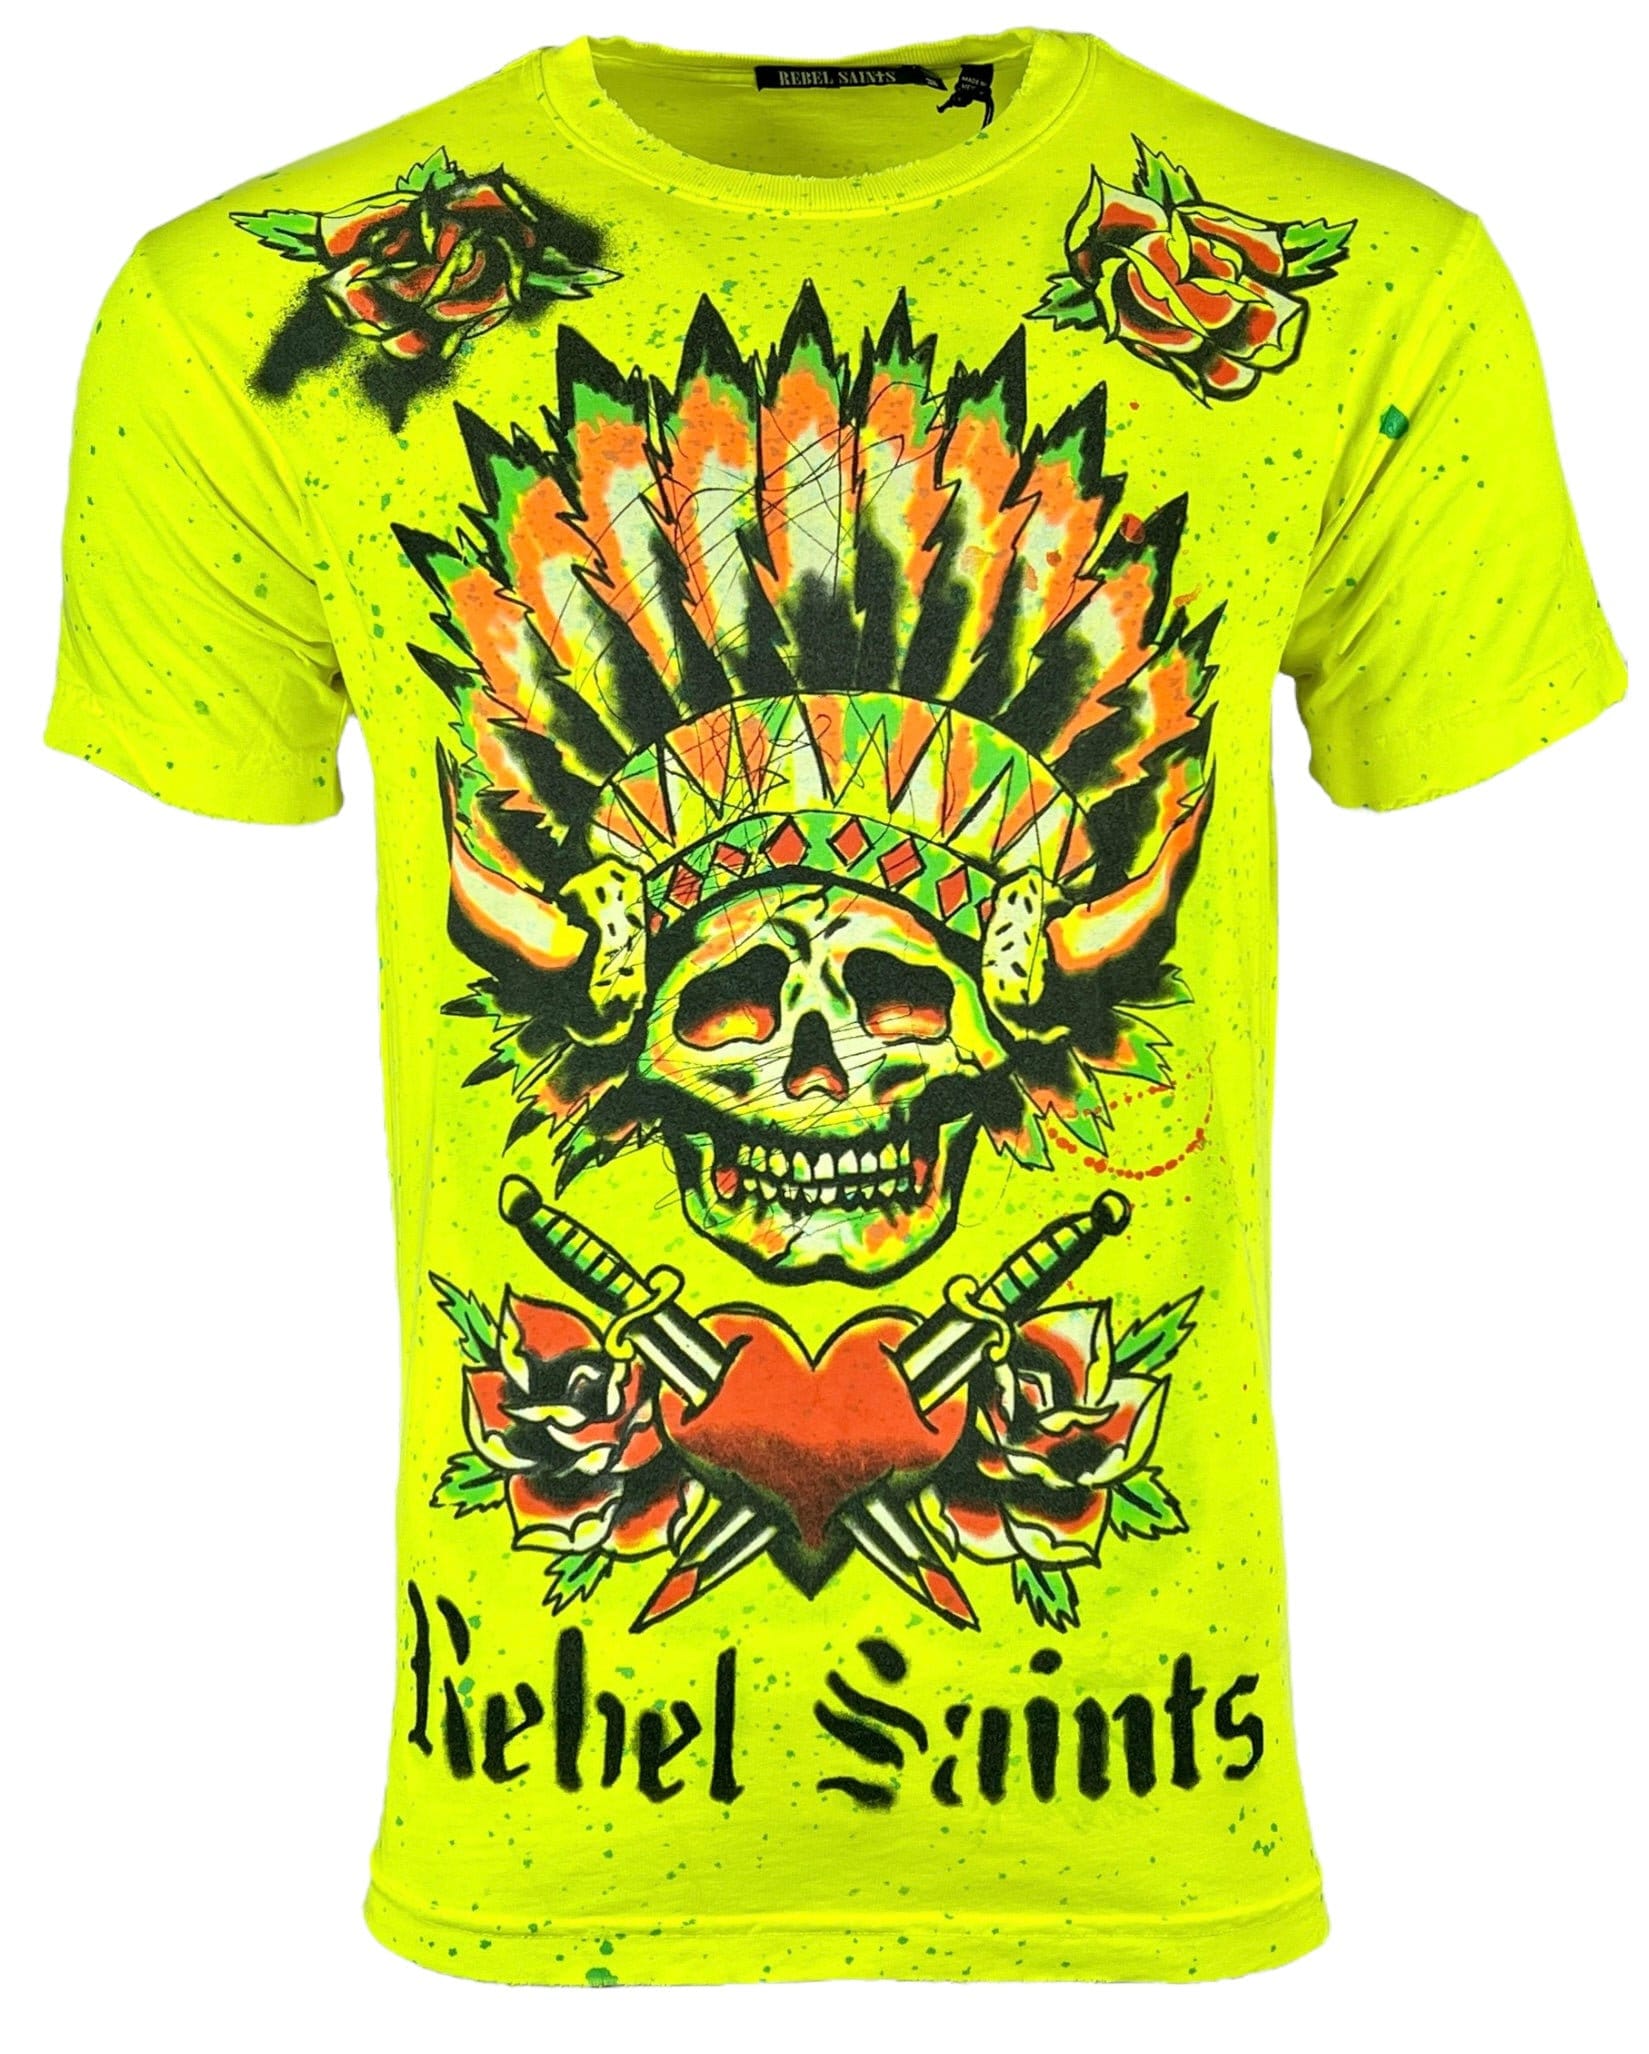 Discover Rebel Saints By Affliction Men's T-shirt MARCHING Premium Quality